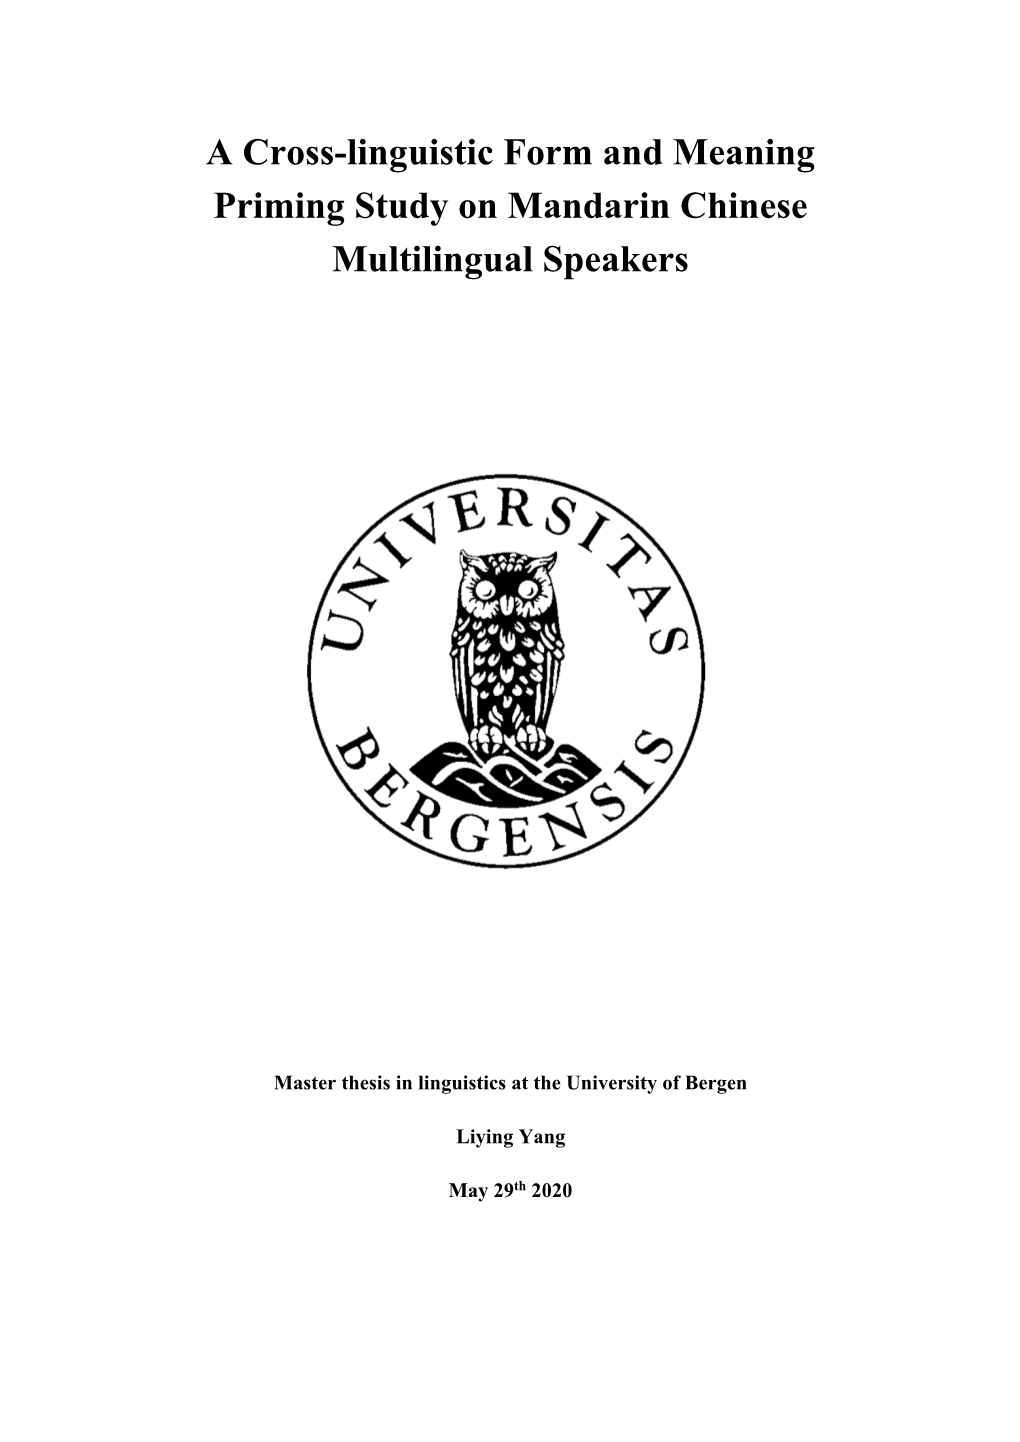 A Cross-Linguistic Form and Meaning Priming Study on Mandarin Chinese Multilingual Speakers